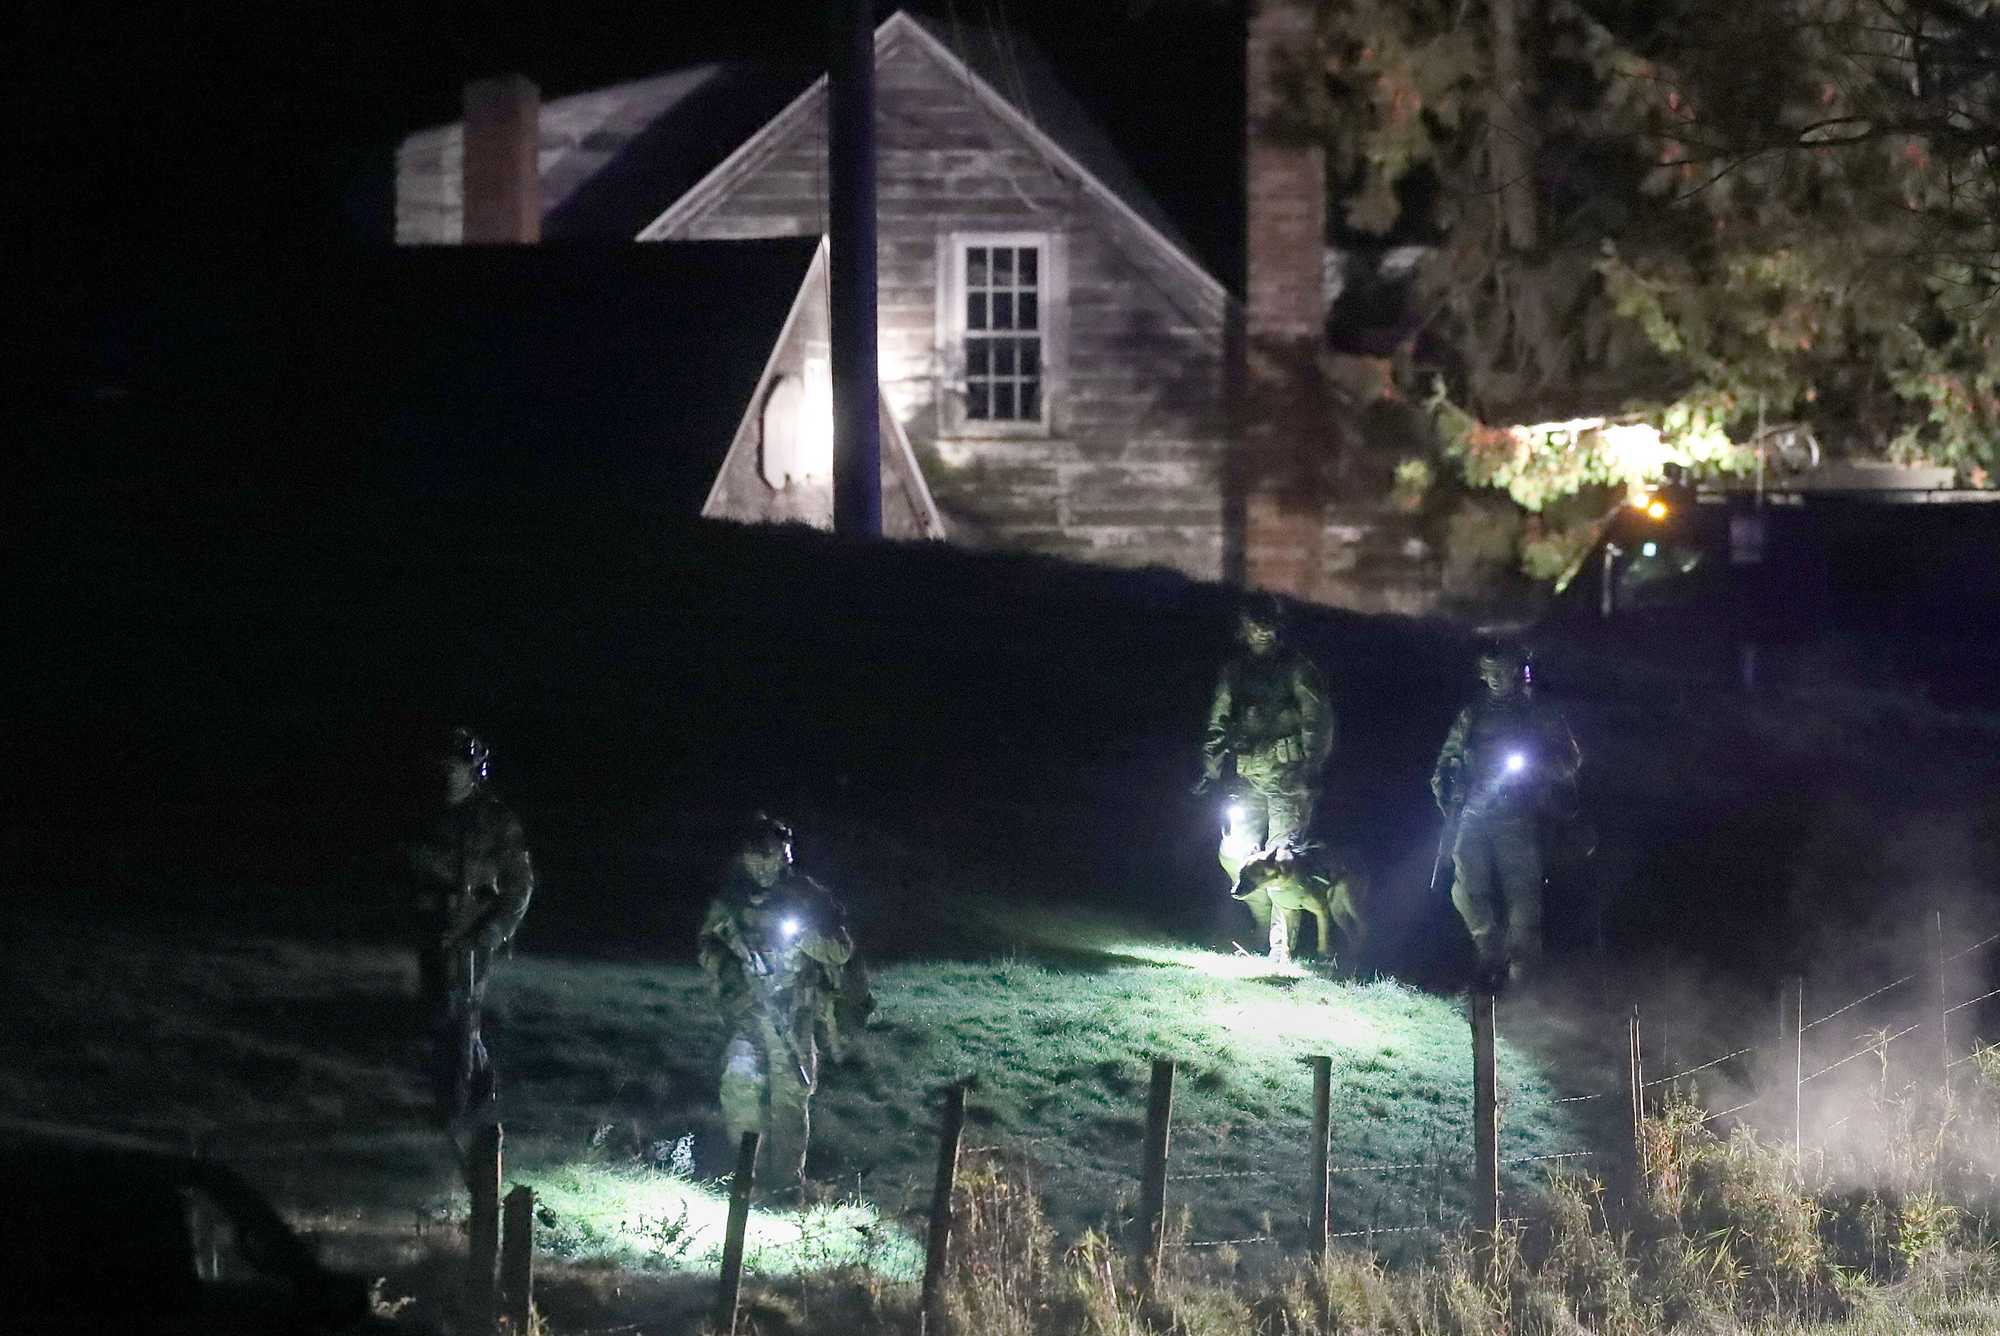 With the aid of a canine unit, police on Oct. 26 searched a rural property belonging to the father of gunman Robert Card on Meadow Road in Bowdoin, Maine. The gunman was still at large a day after the mass shootings, which forced a lockdown of multiple Maine communities.